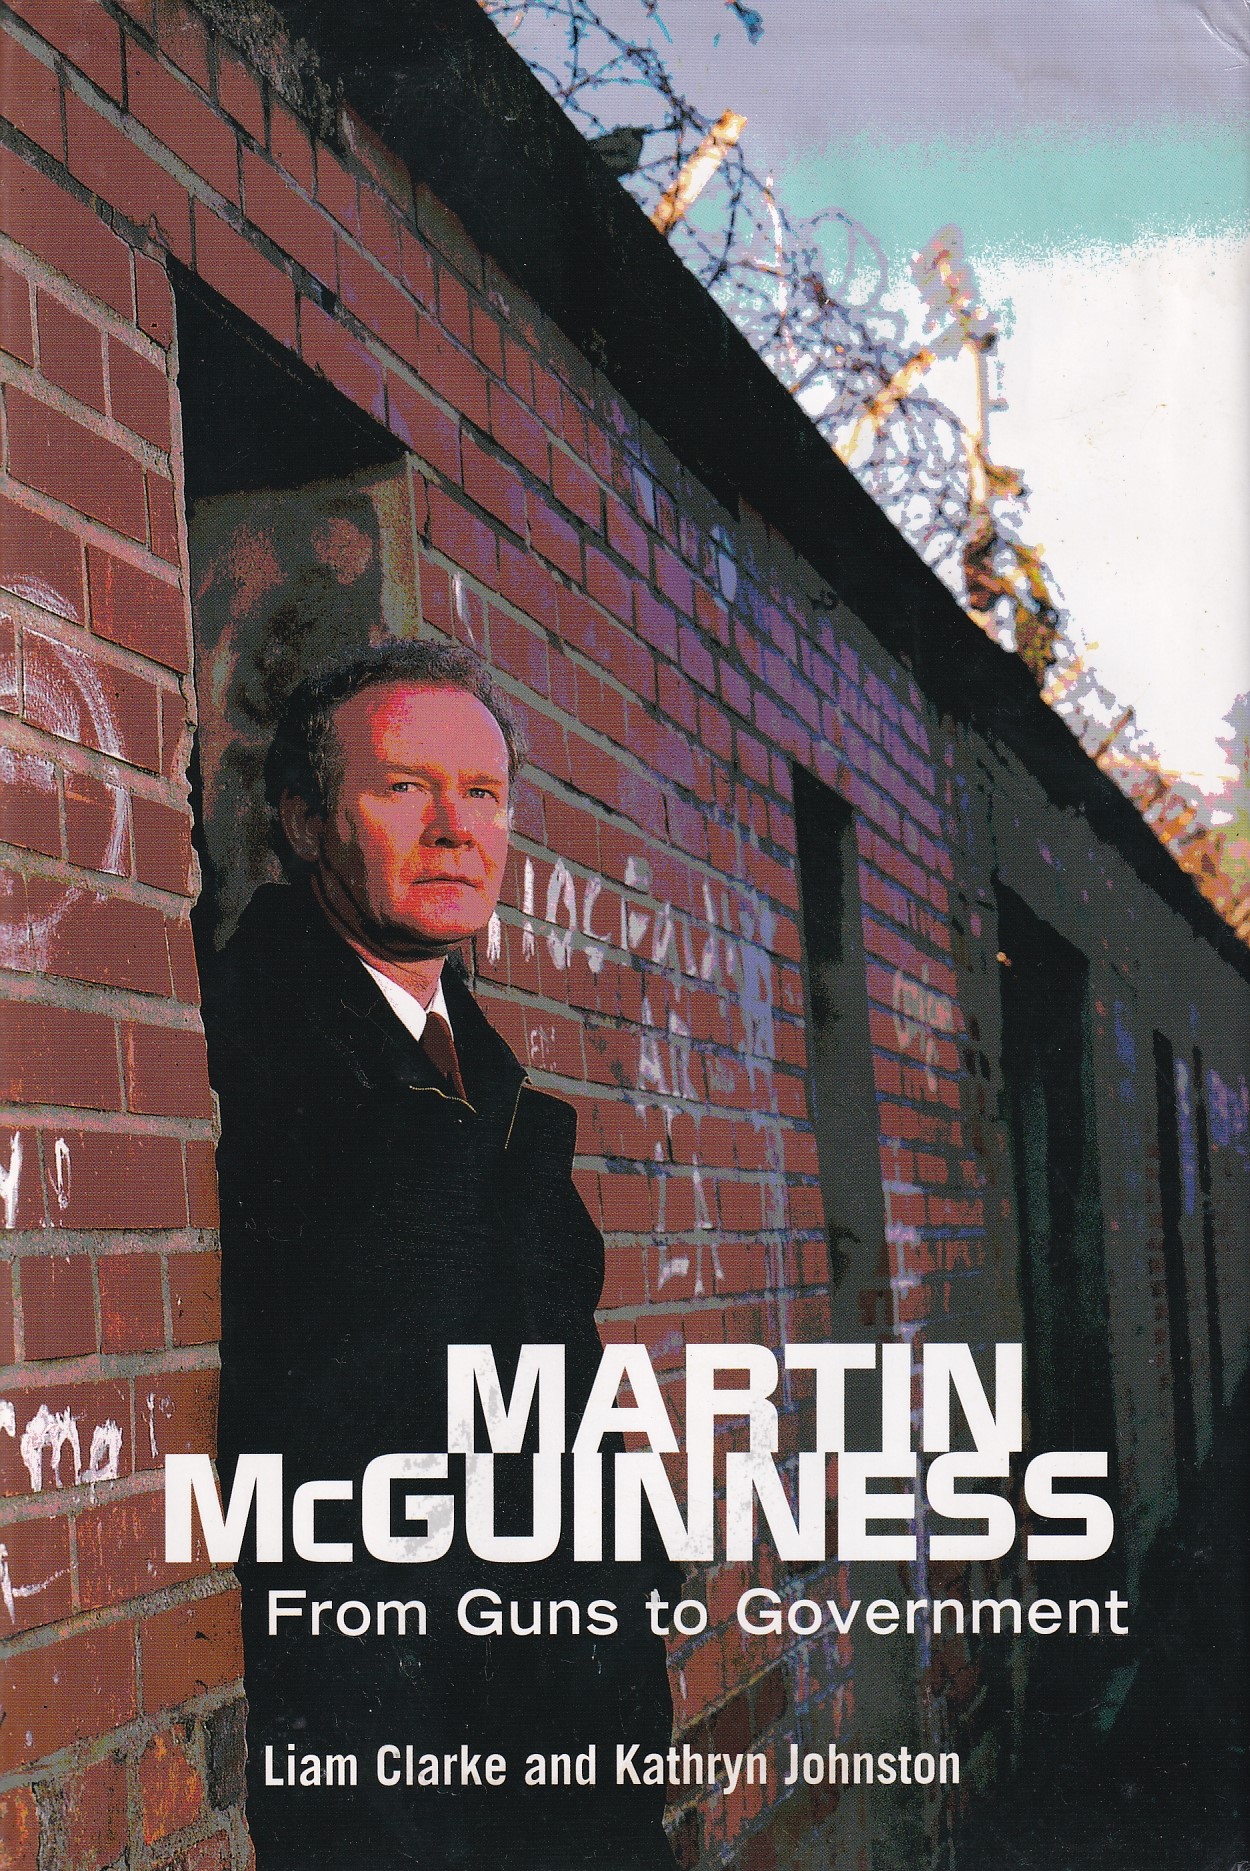 Martin McGuinness: From Guns to Government by Liam Clarke & Kathryn Johnston